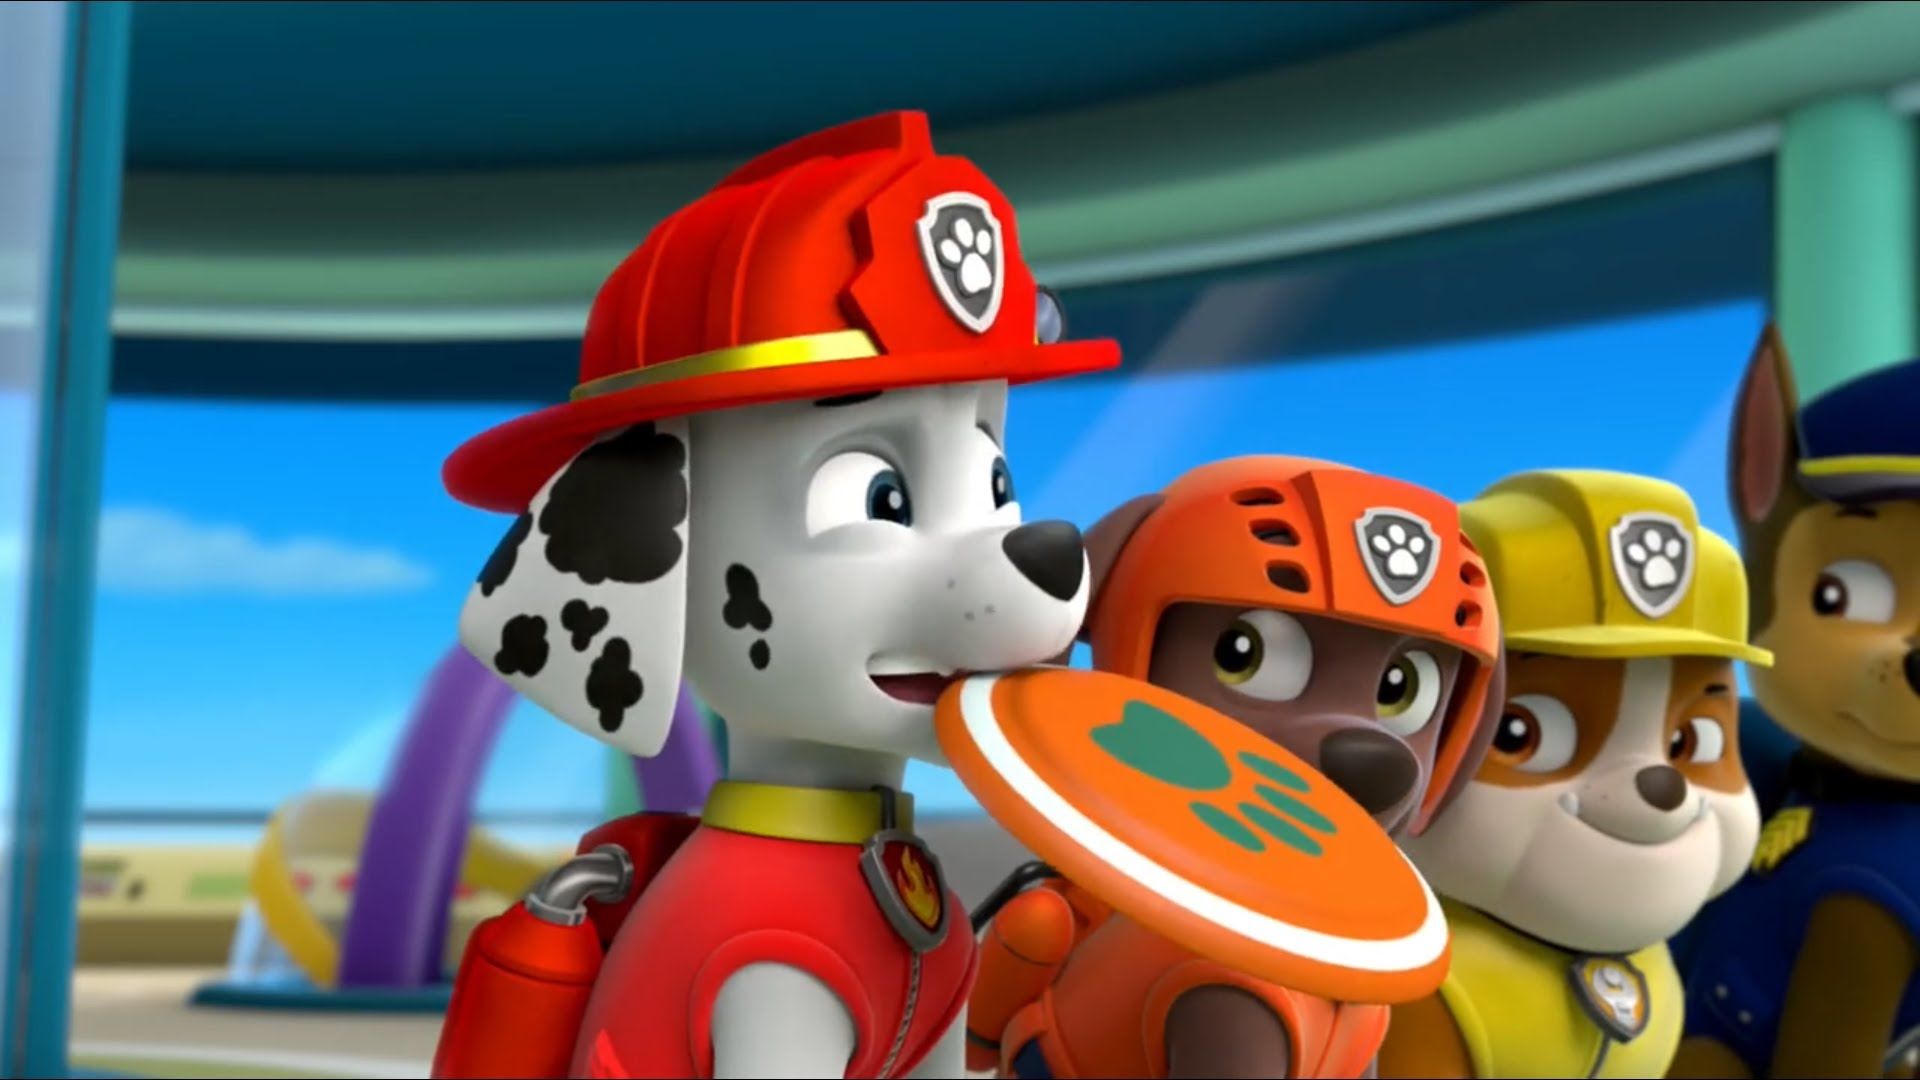 PAW Patrol Full Episodes (S01E16) ♥♥♥ Pups Save Christmas ♥♥♥fgg c dfxe3! Ŕ\8>. Paw patrol pups, Paw patrol, Paw patrol coloring